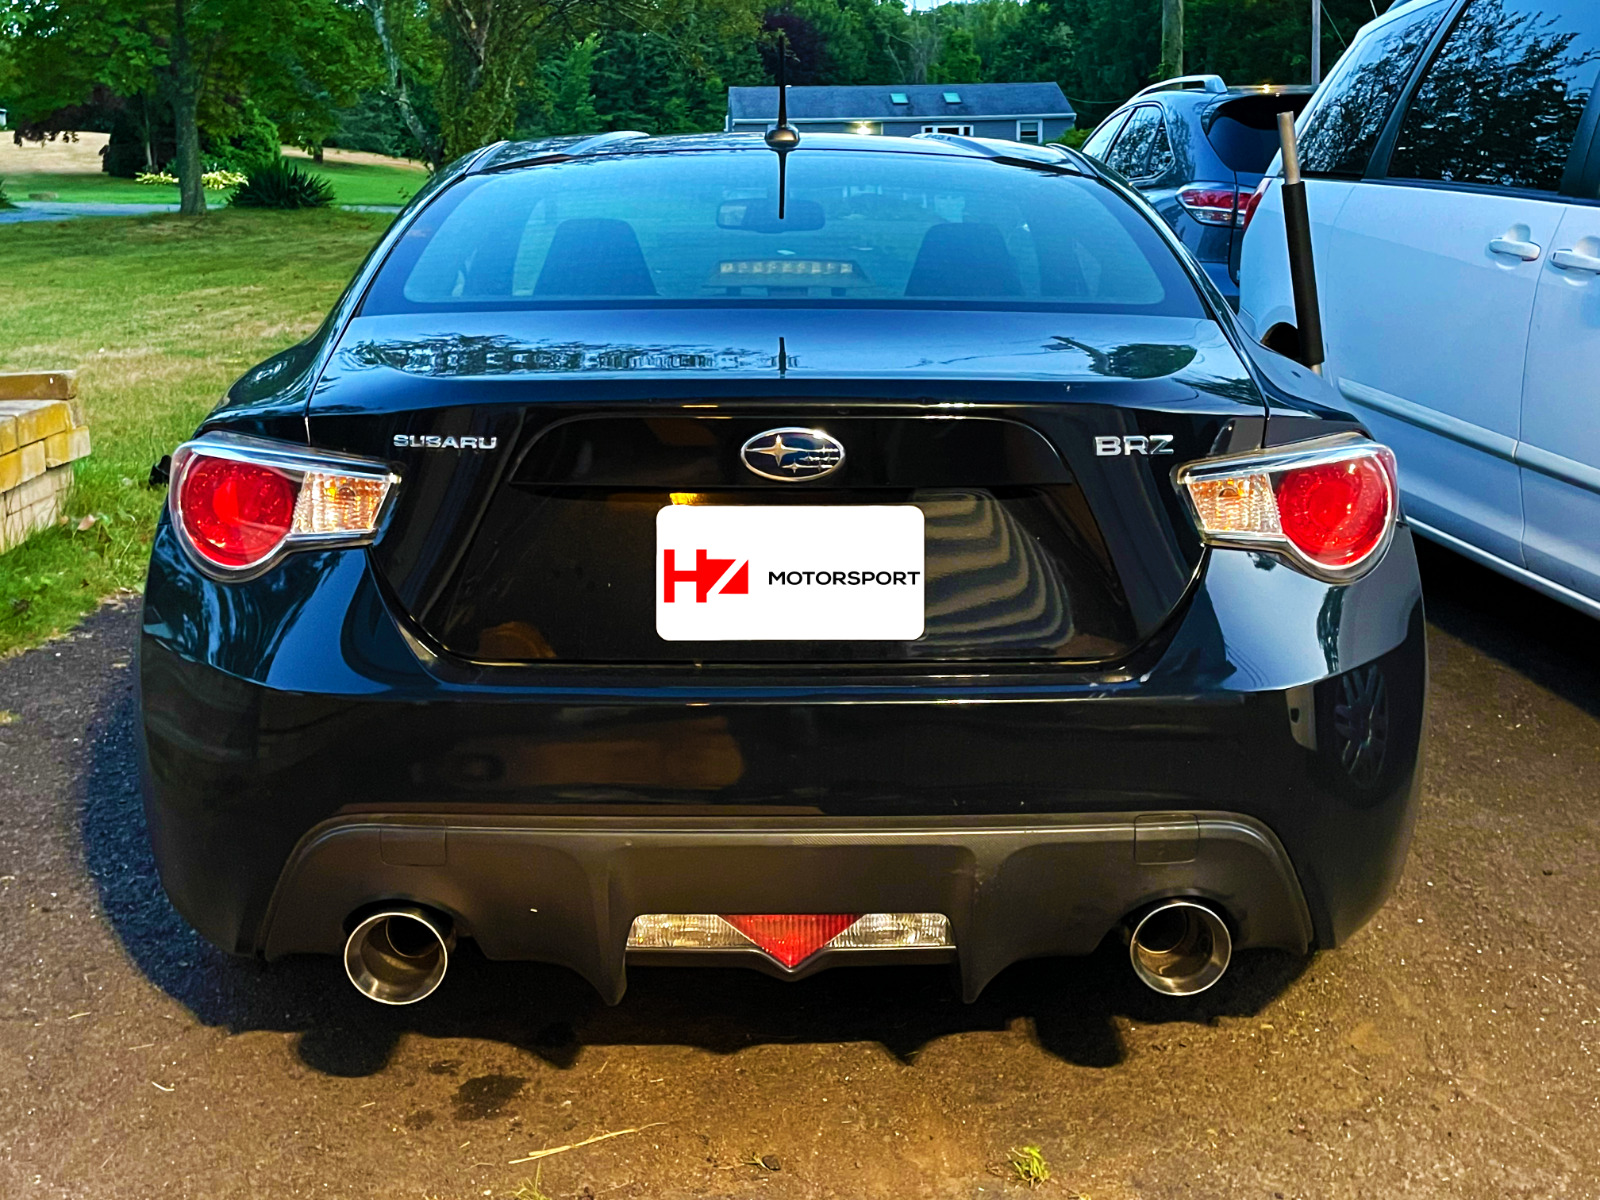 Stainless Steel Catback Exhaust for 2013+ Subaru BRZ, Scion FRS, and Toyota GT86